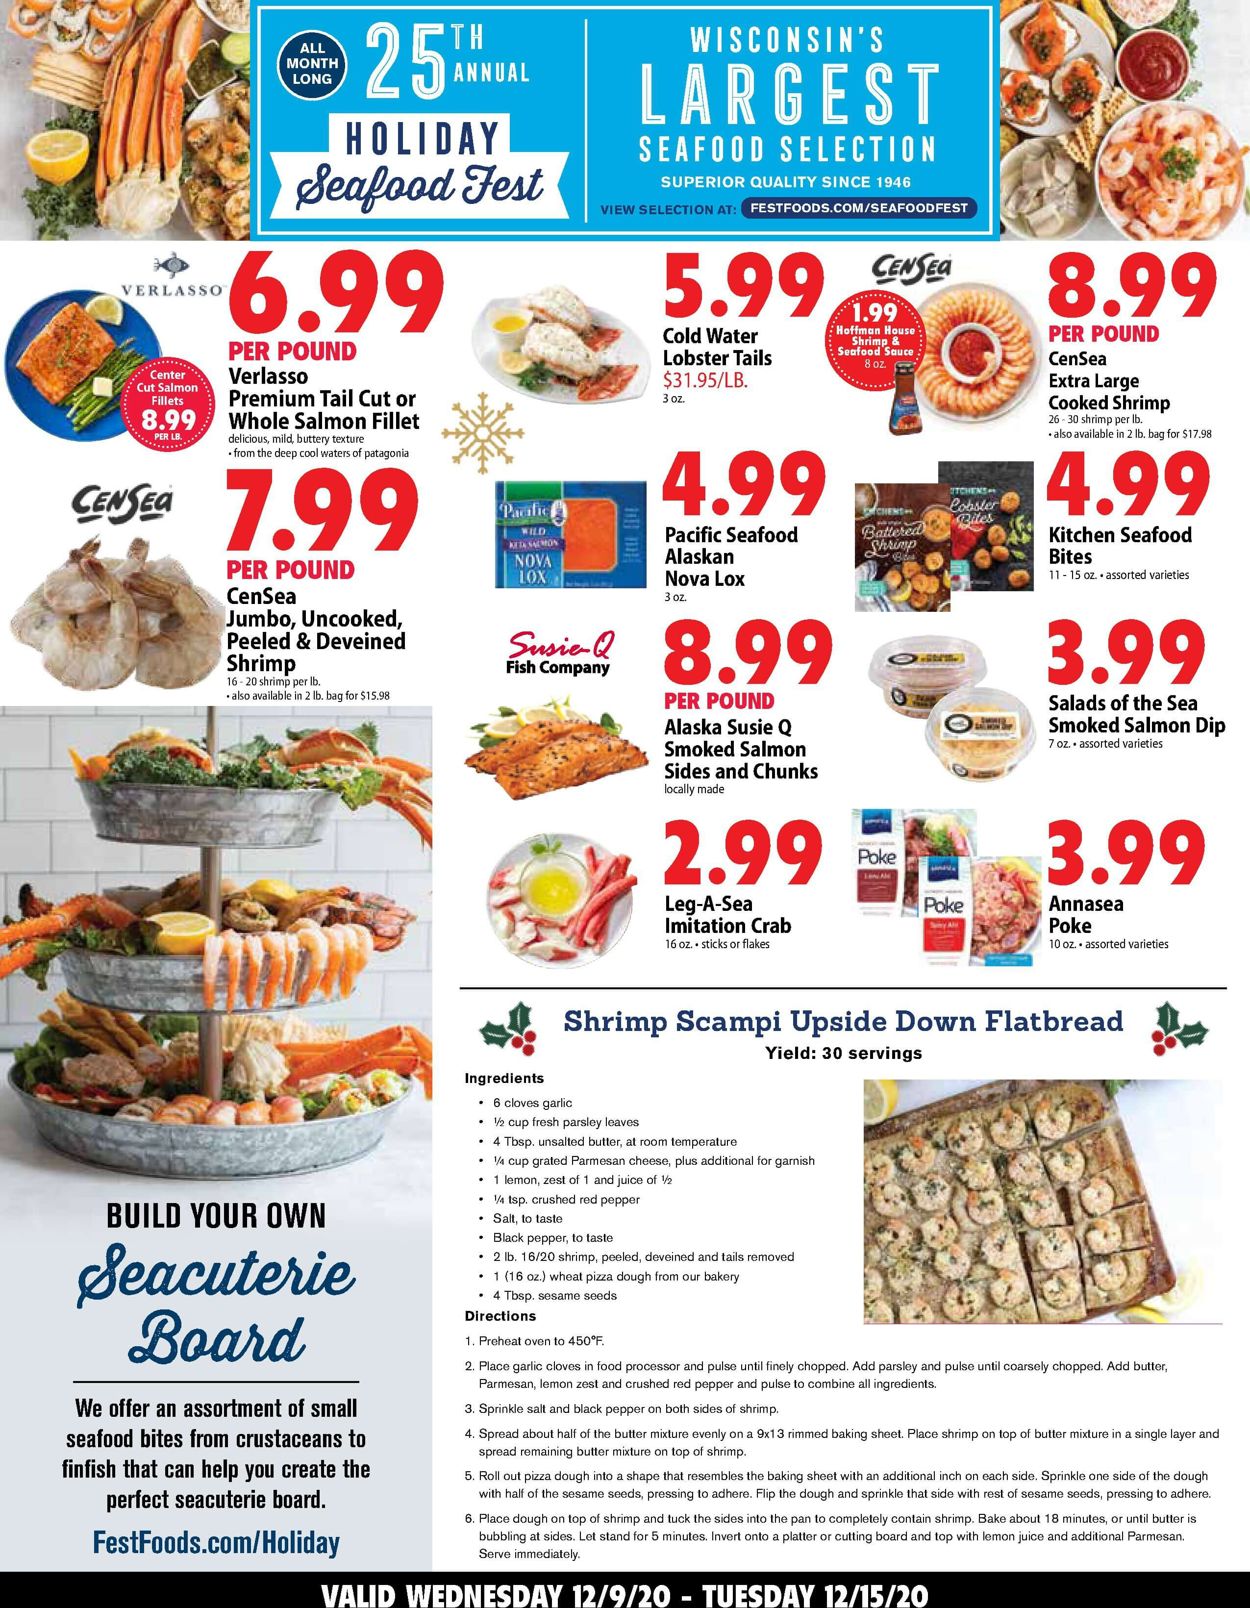 Festival Foods Current weekly ad 12/09 - 12/15/2020 [7] - frequent-ads.com